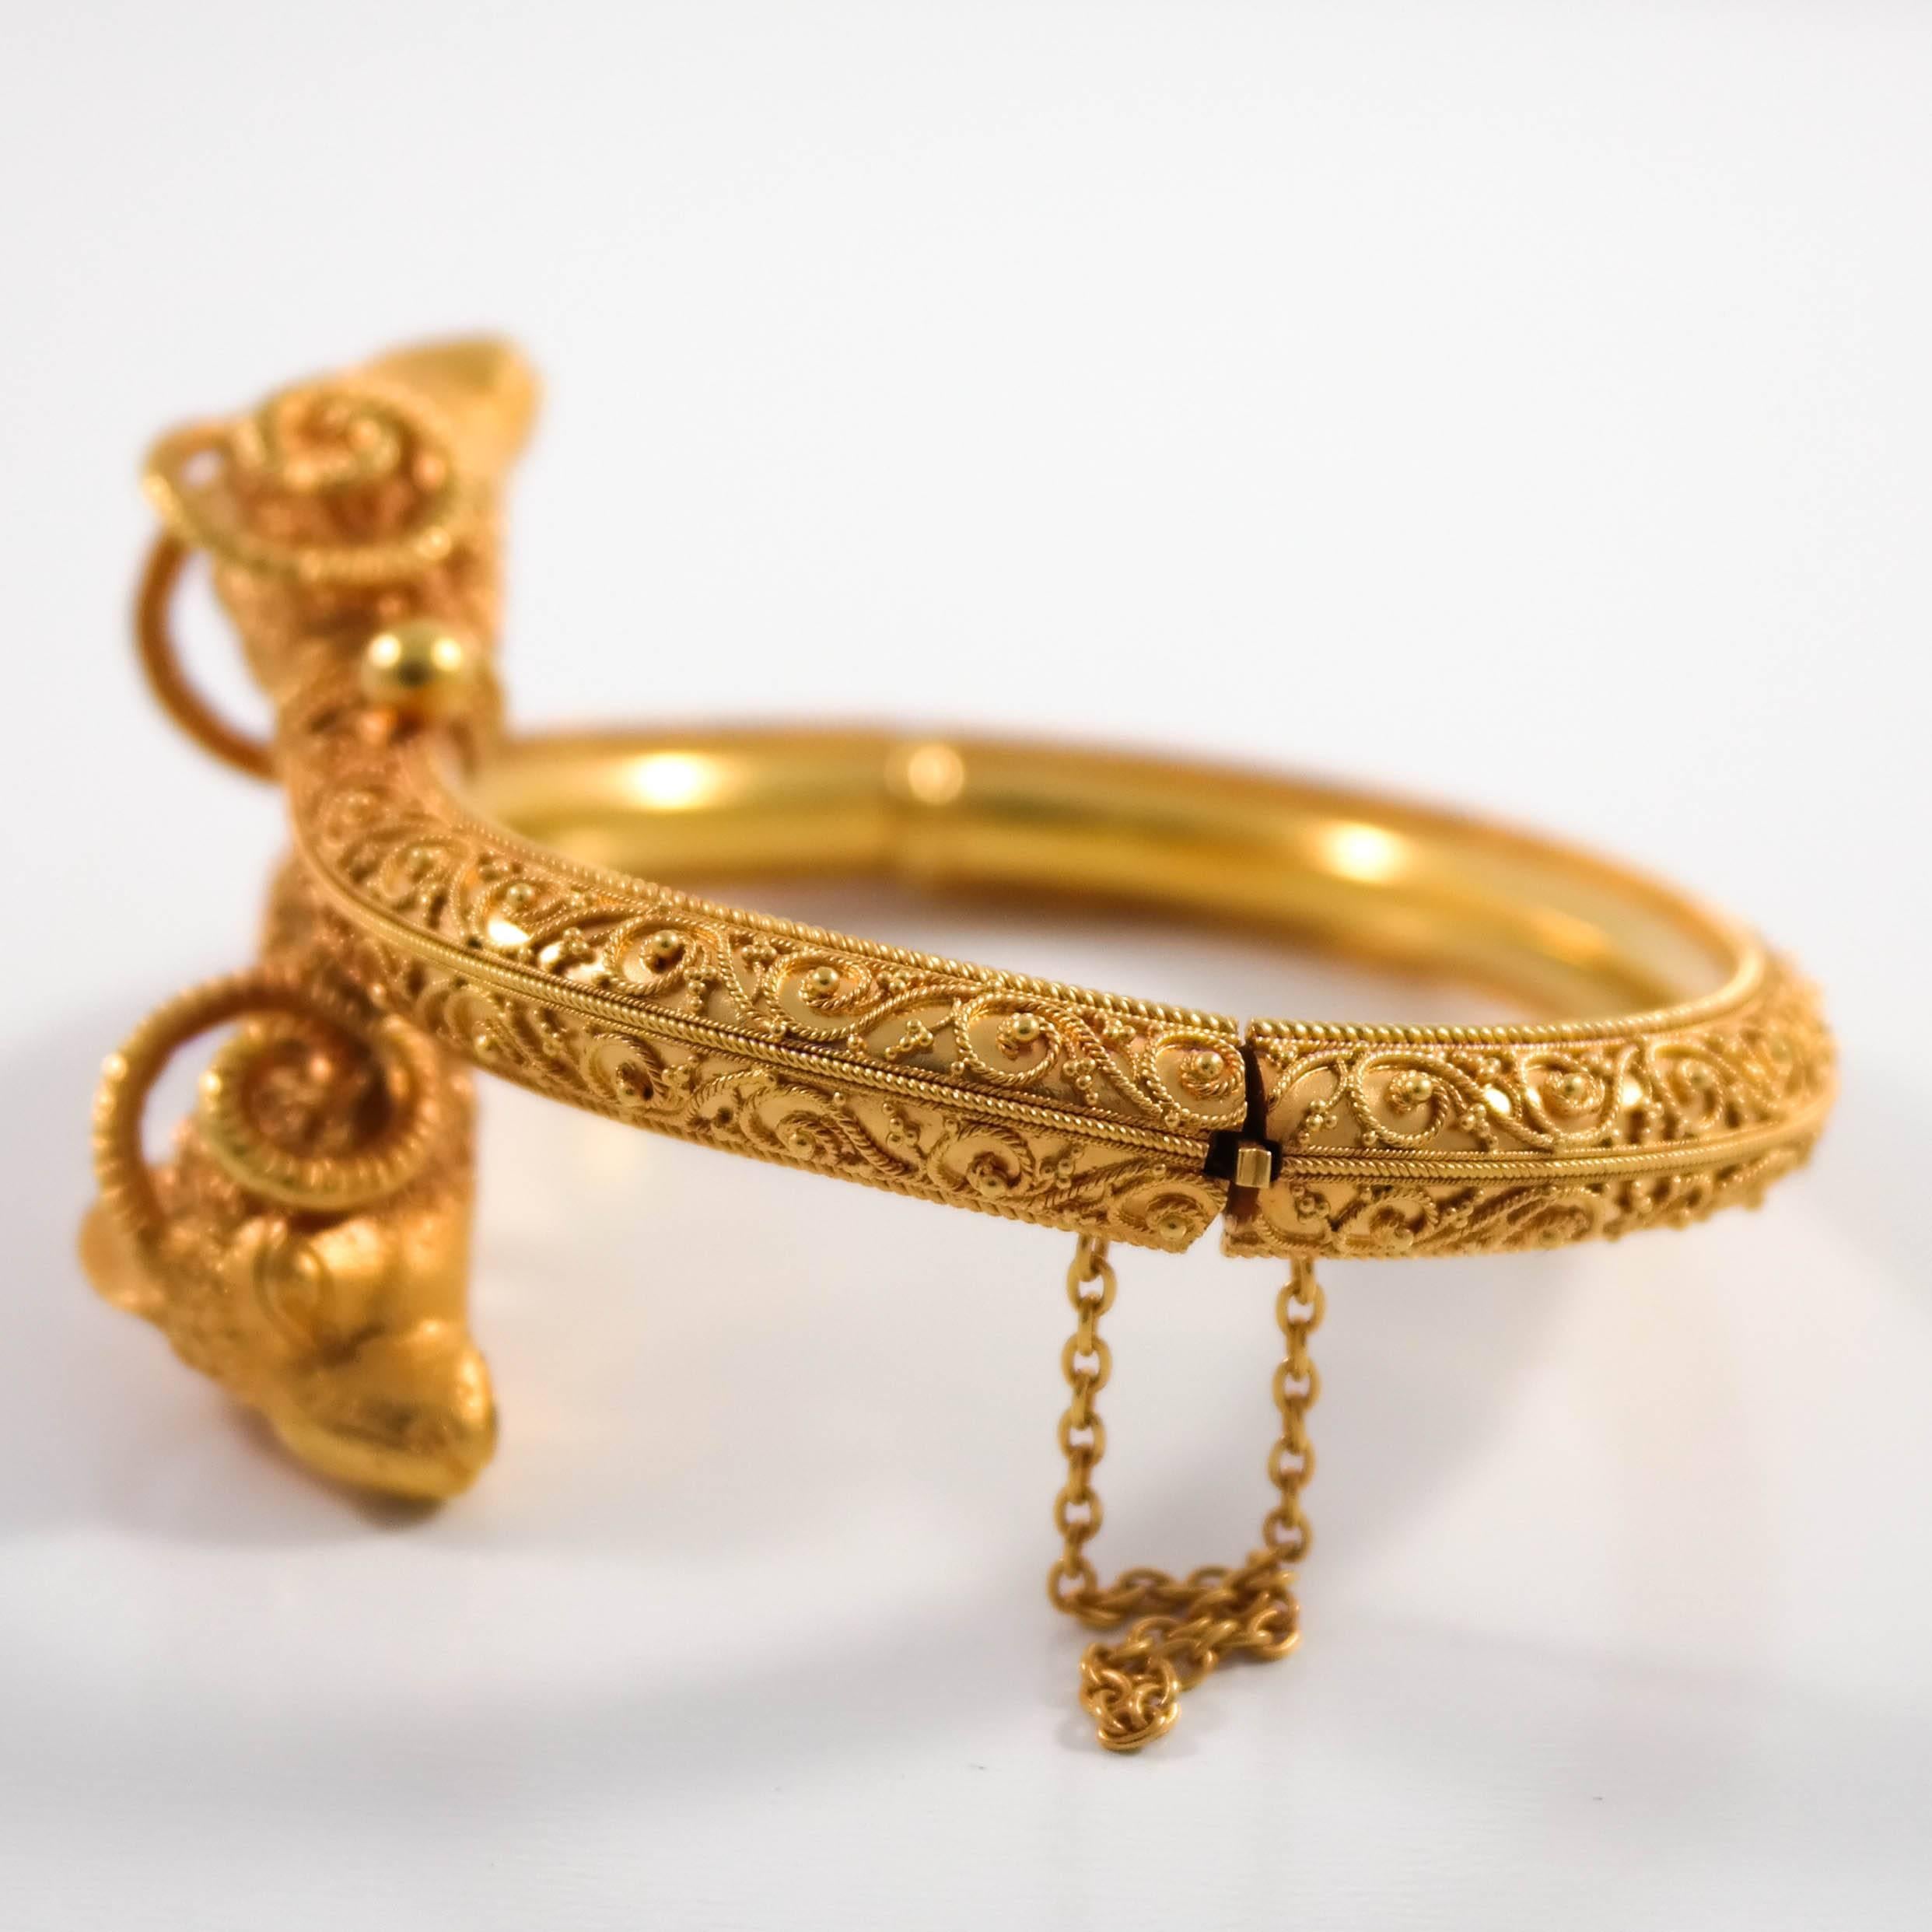  14k yellow gold Etruscan revival rams head bangle bracelet. The bypass rams head motif decorated with very fine wire, and bead work, with a hinged opening, and safety chain that was added at a later date. The bracelet is in very good condition,